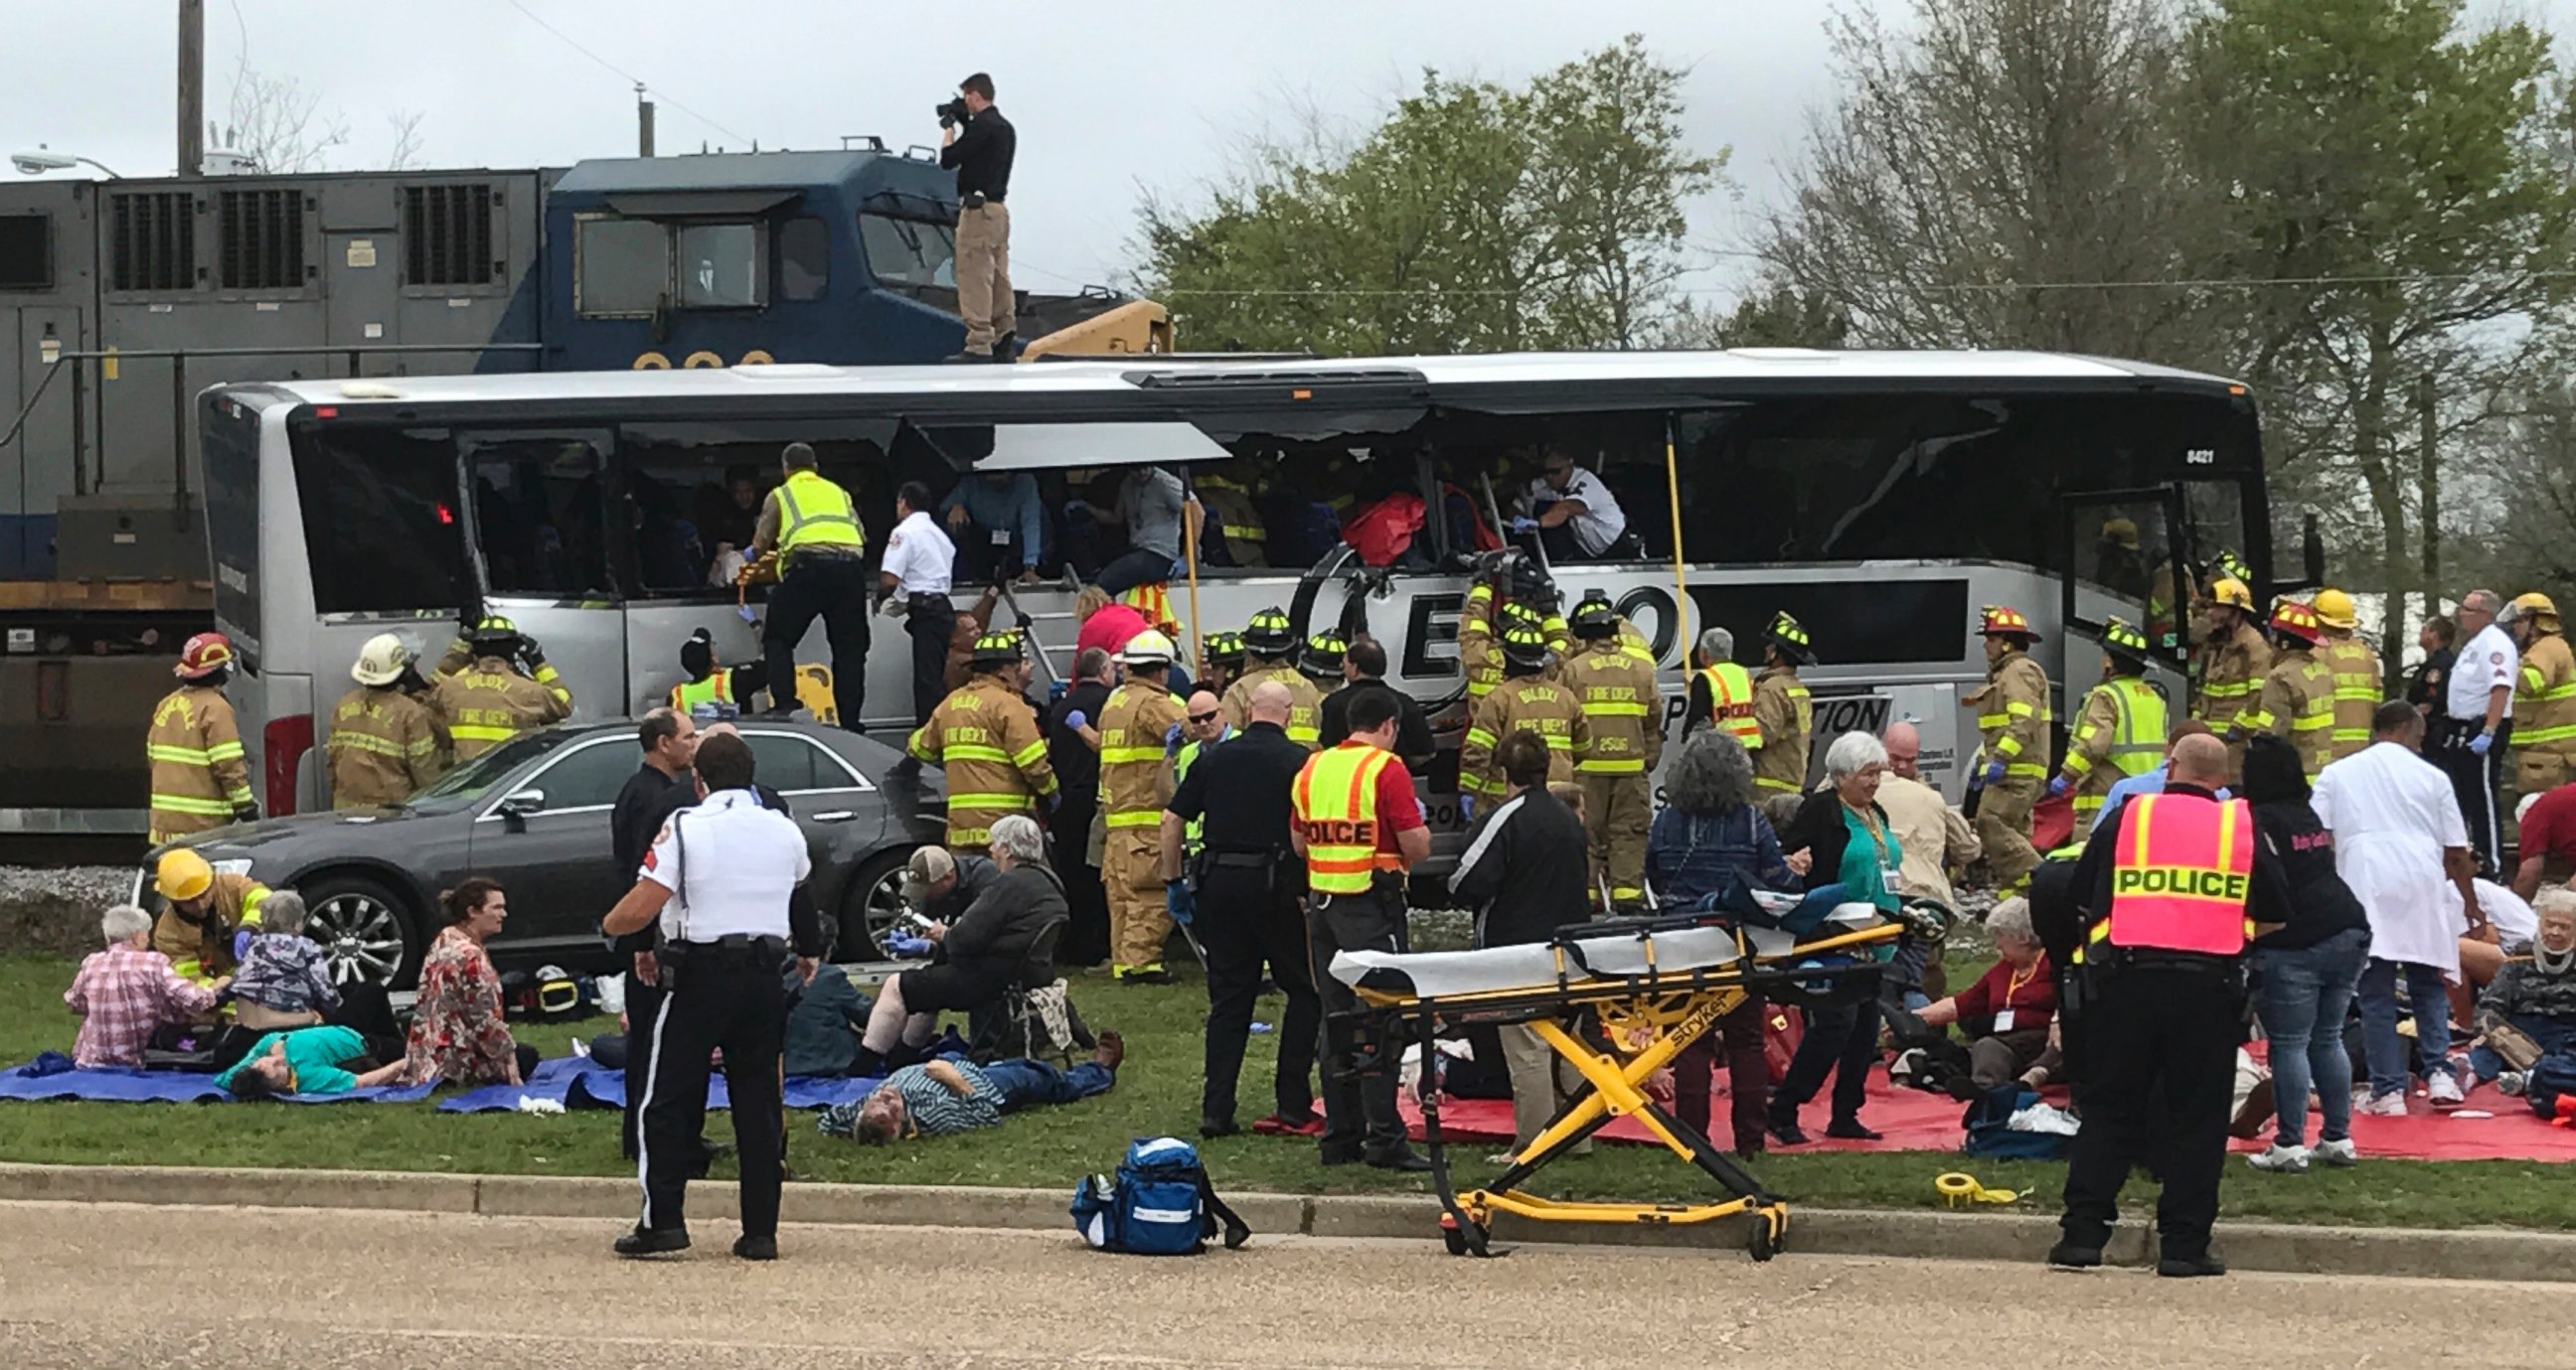 PHOTO: Biloxi, Miss., firefighters help passengers of a charter bus out of the damaged vehicle after the bus collided with a train, March 7, 2017. At least 3 people are dead .